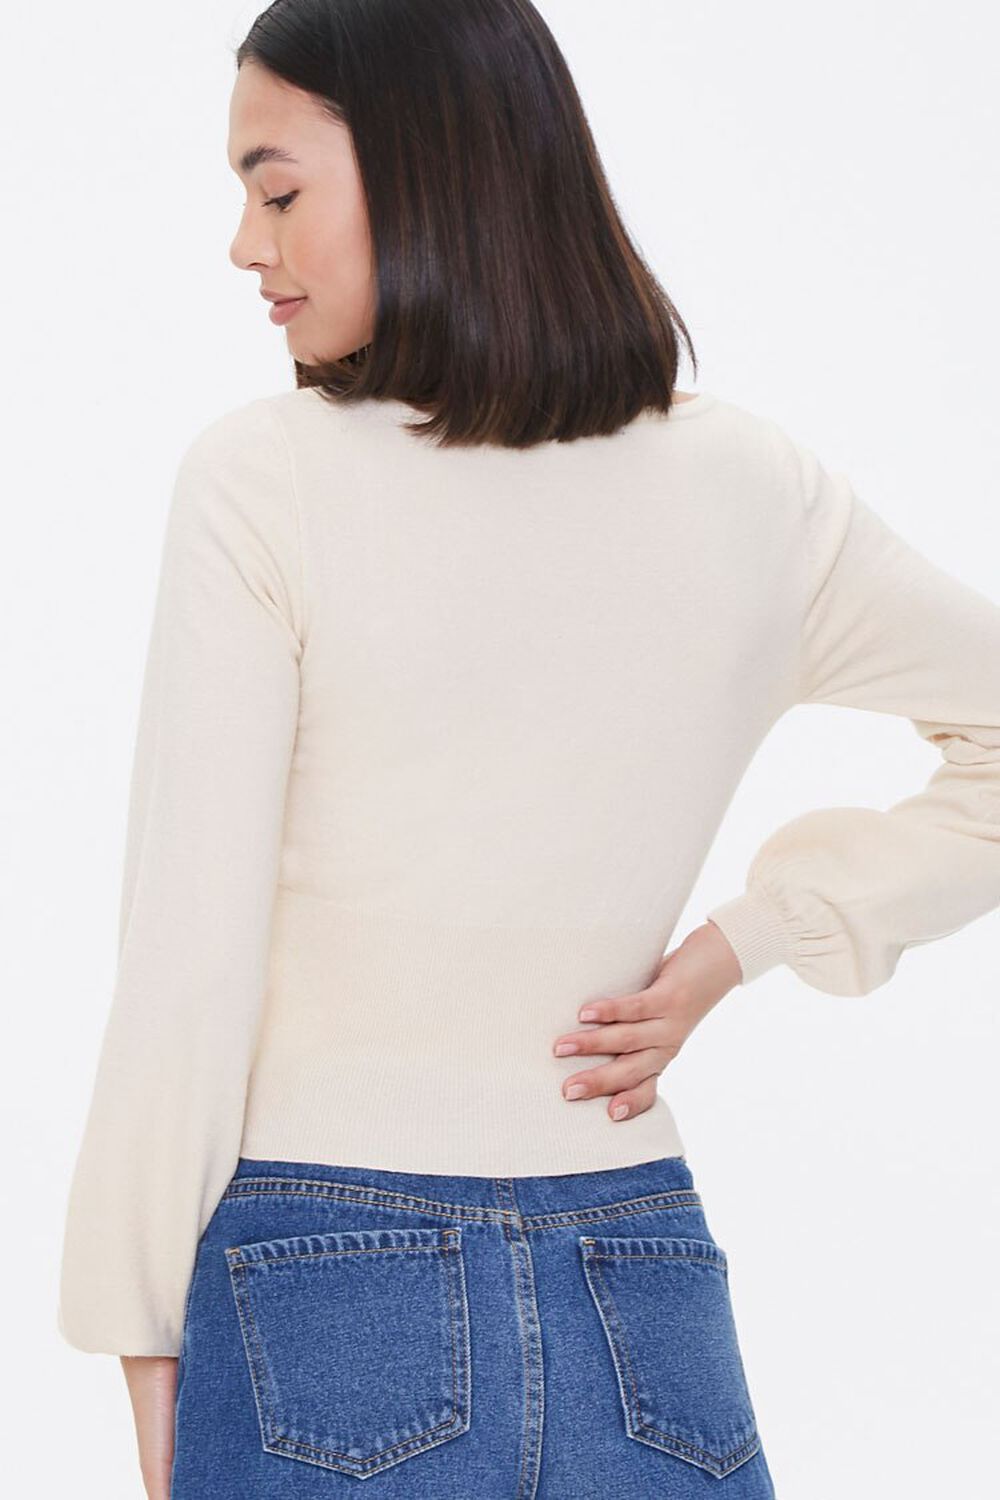 TAUPE Ribbed Sweater-Knit Top, image 3